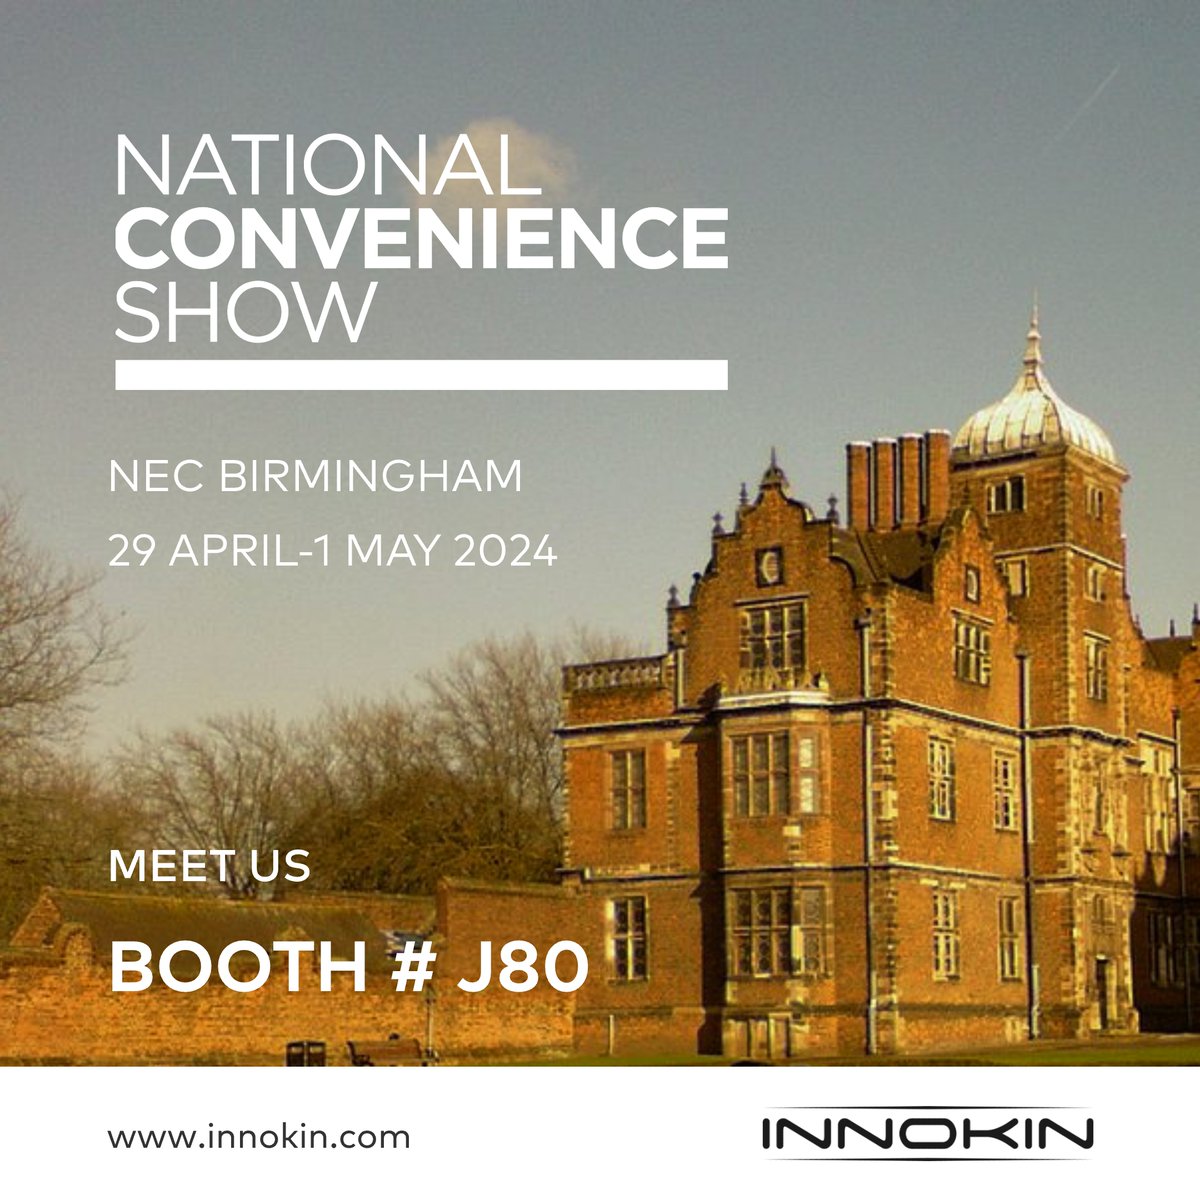 🌟 Join us at the National Convenience Show! 🌟 📅 Date: April 29th - May 1st, 2024 📍 Location: NEC Birmingham 👉 Booth: #J80 Get ready for an electrifying experience! Swing by Booth #J80 to discover the latest innovations from Innokin! See you there! #Innokin #NCS2024